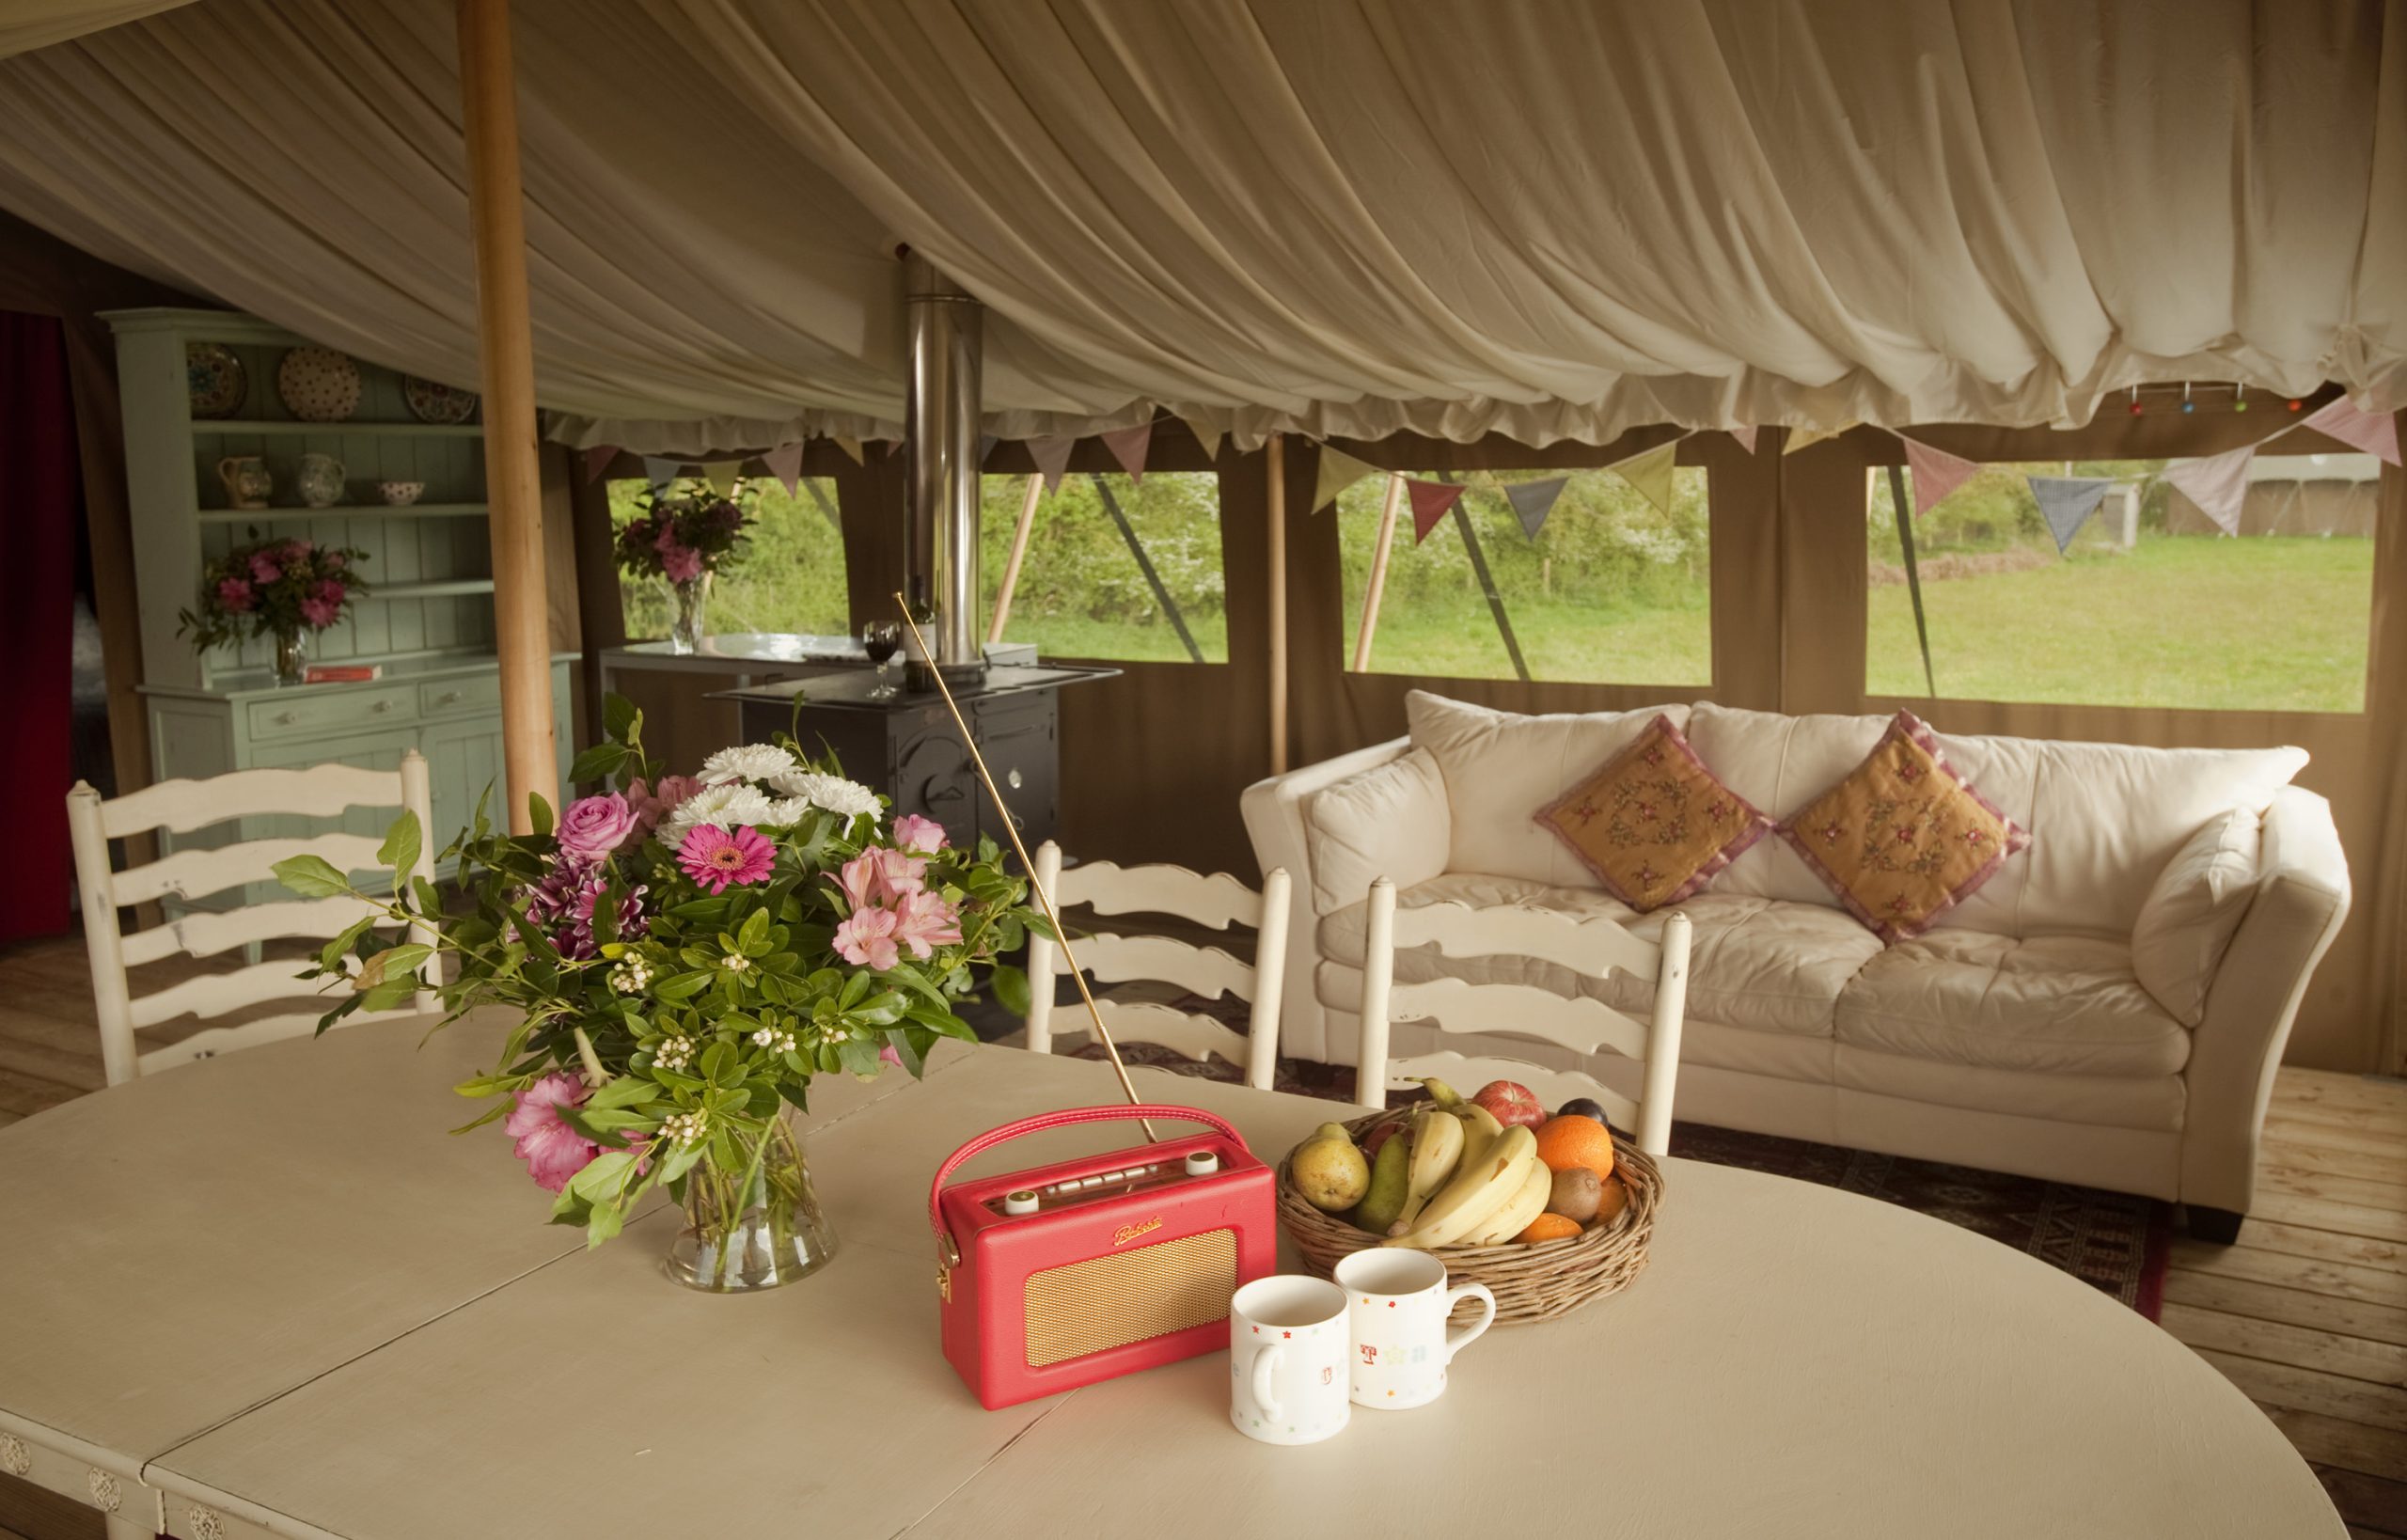 Dining Table inside a safari glamping tent at Cuckoo Down Farm Exeter